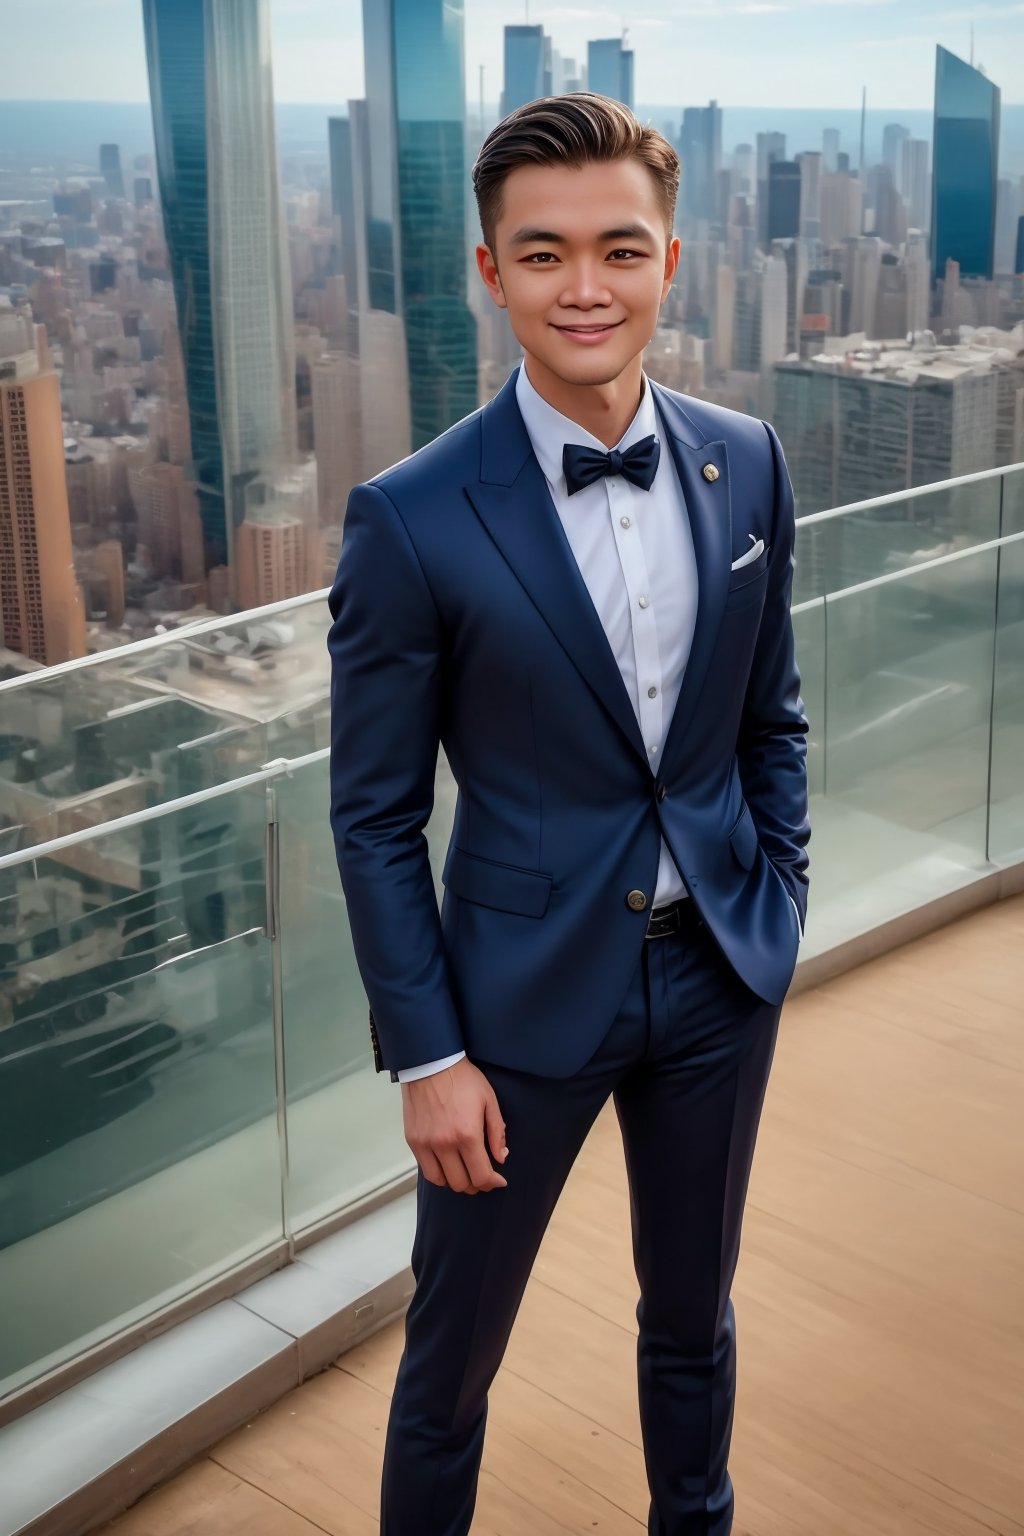 Handsome Chinese male, 30 years old, handsome, attractive, sunny, smiling, wearing a handsome suit, standing on the top of a skyscraper